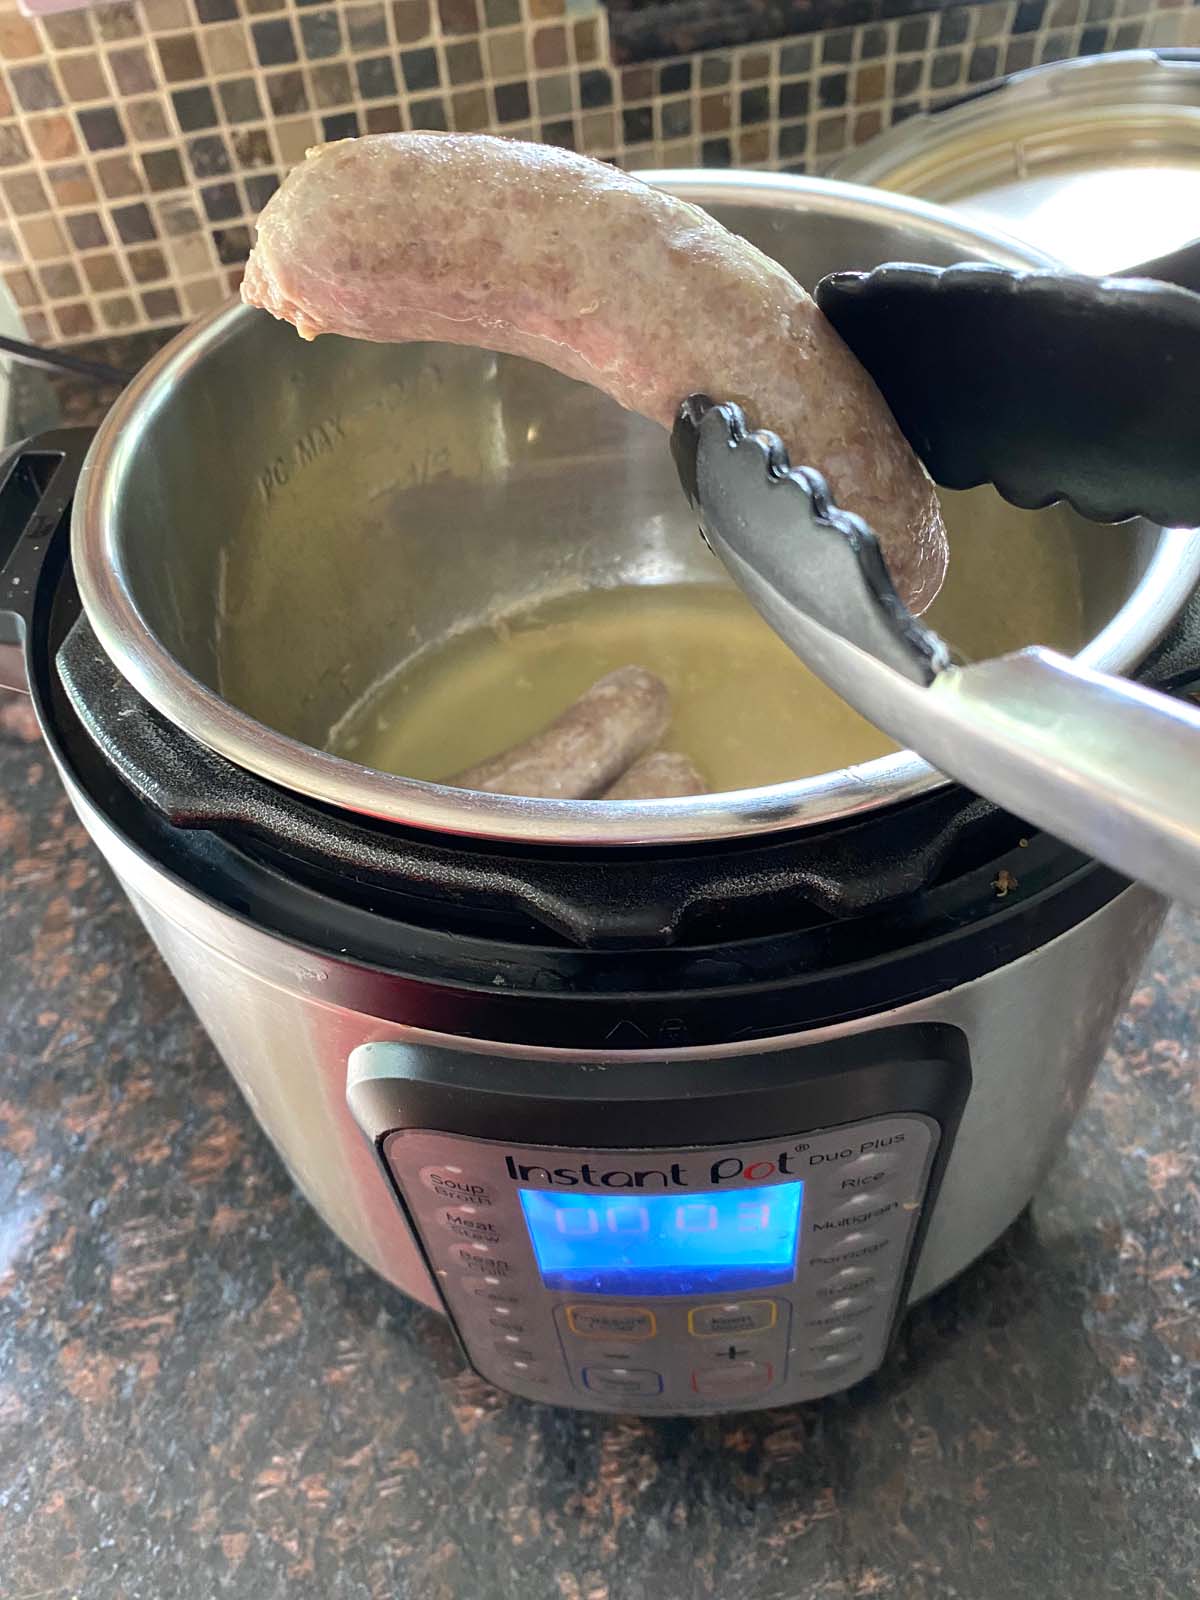 Tongs removing a cooked brat from pressure cooker.